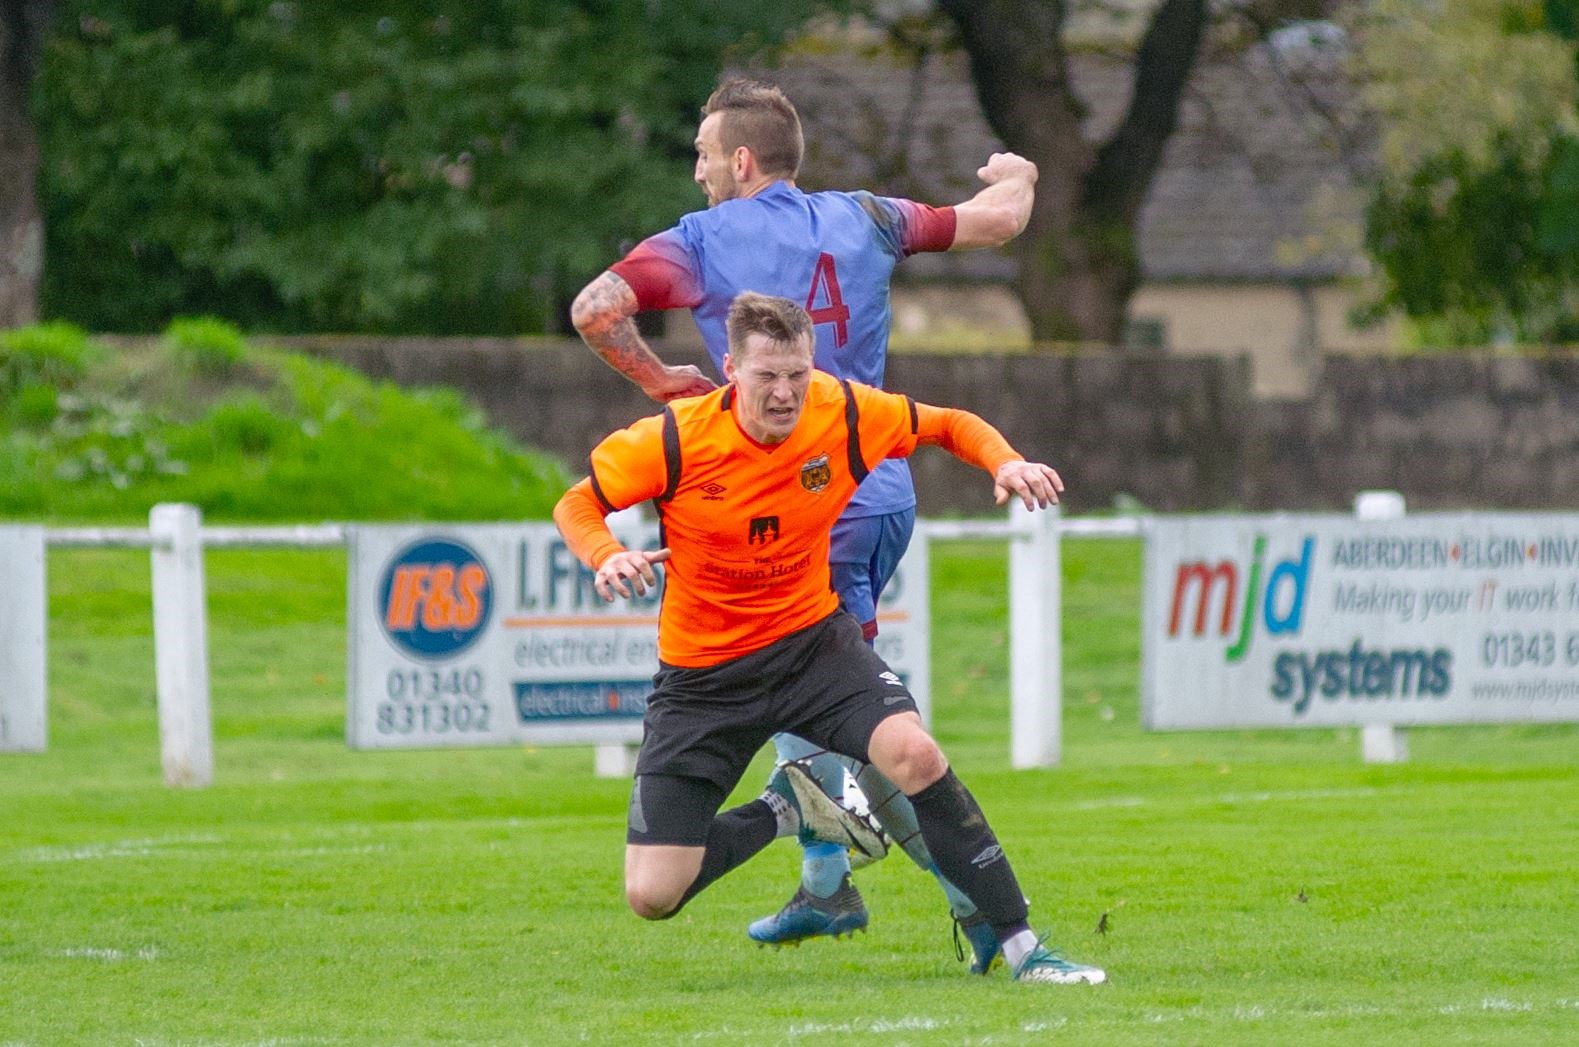 Steven Anderson will miss Rothes’ big Scottish Cup with Inverurie Locos due to work commitments.